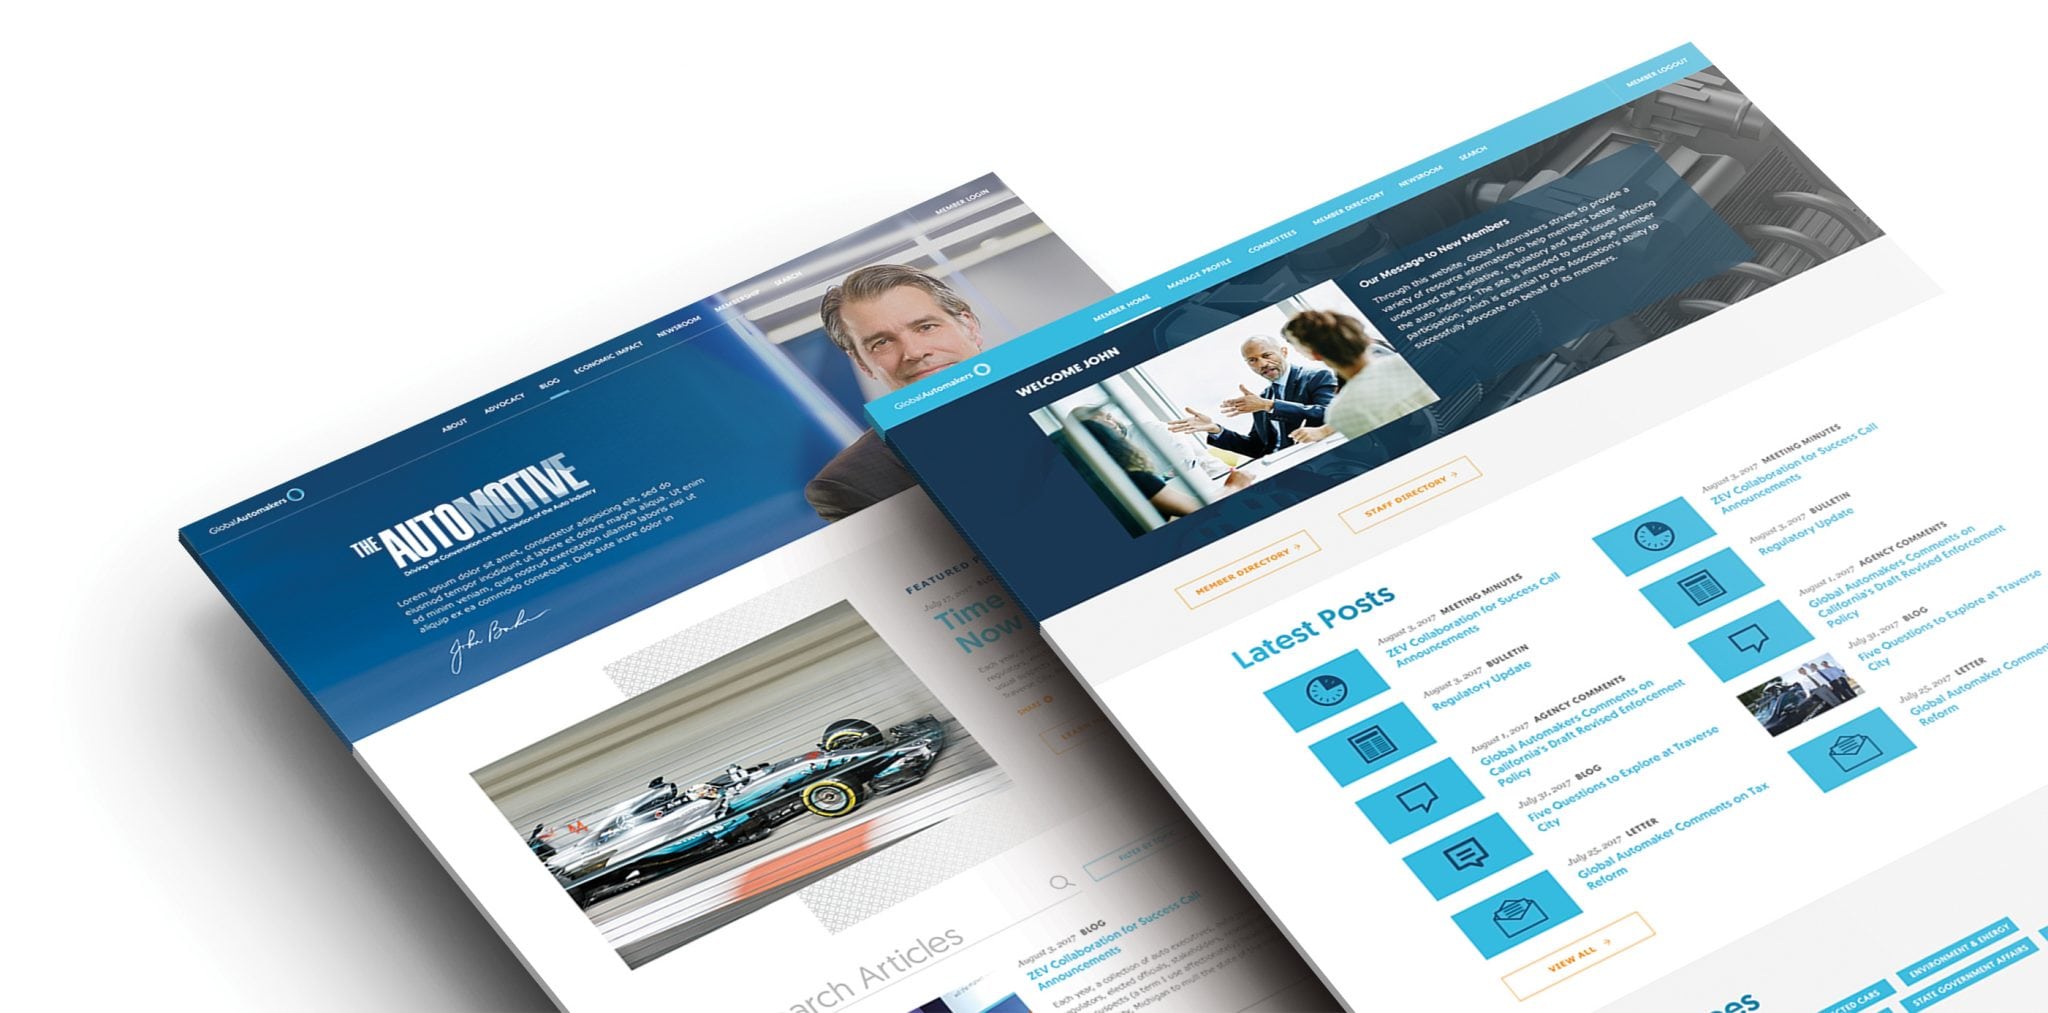 Global Automakers - The Automative Webpages